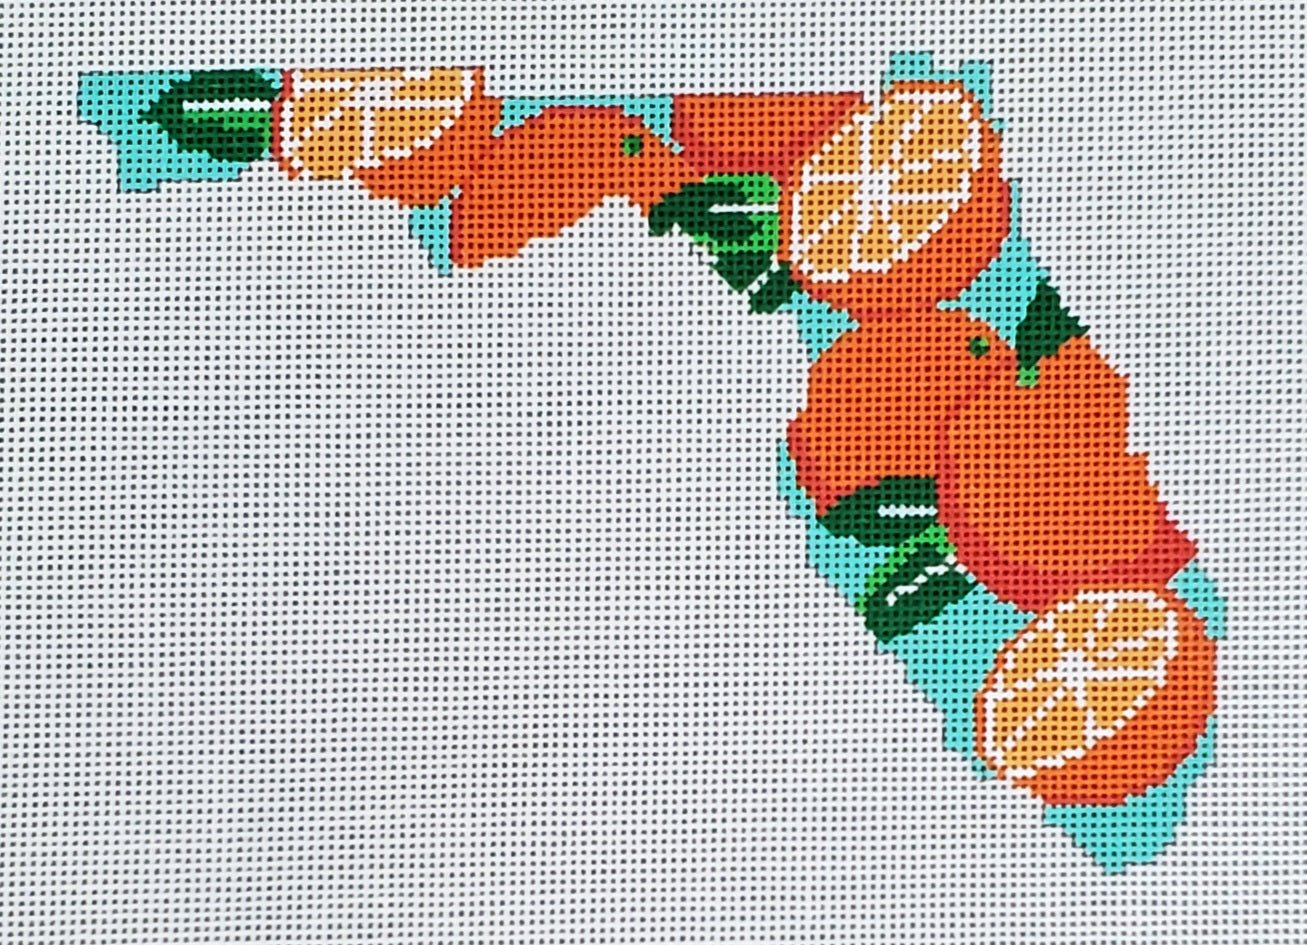 State Shaped FL Oranges - The Flying Needles